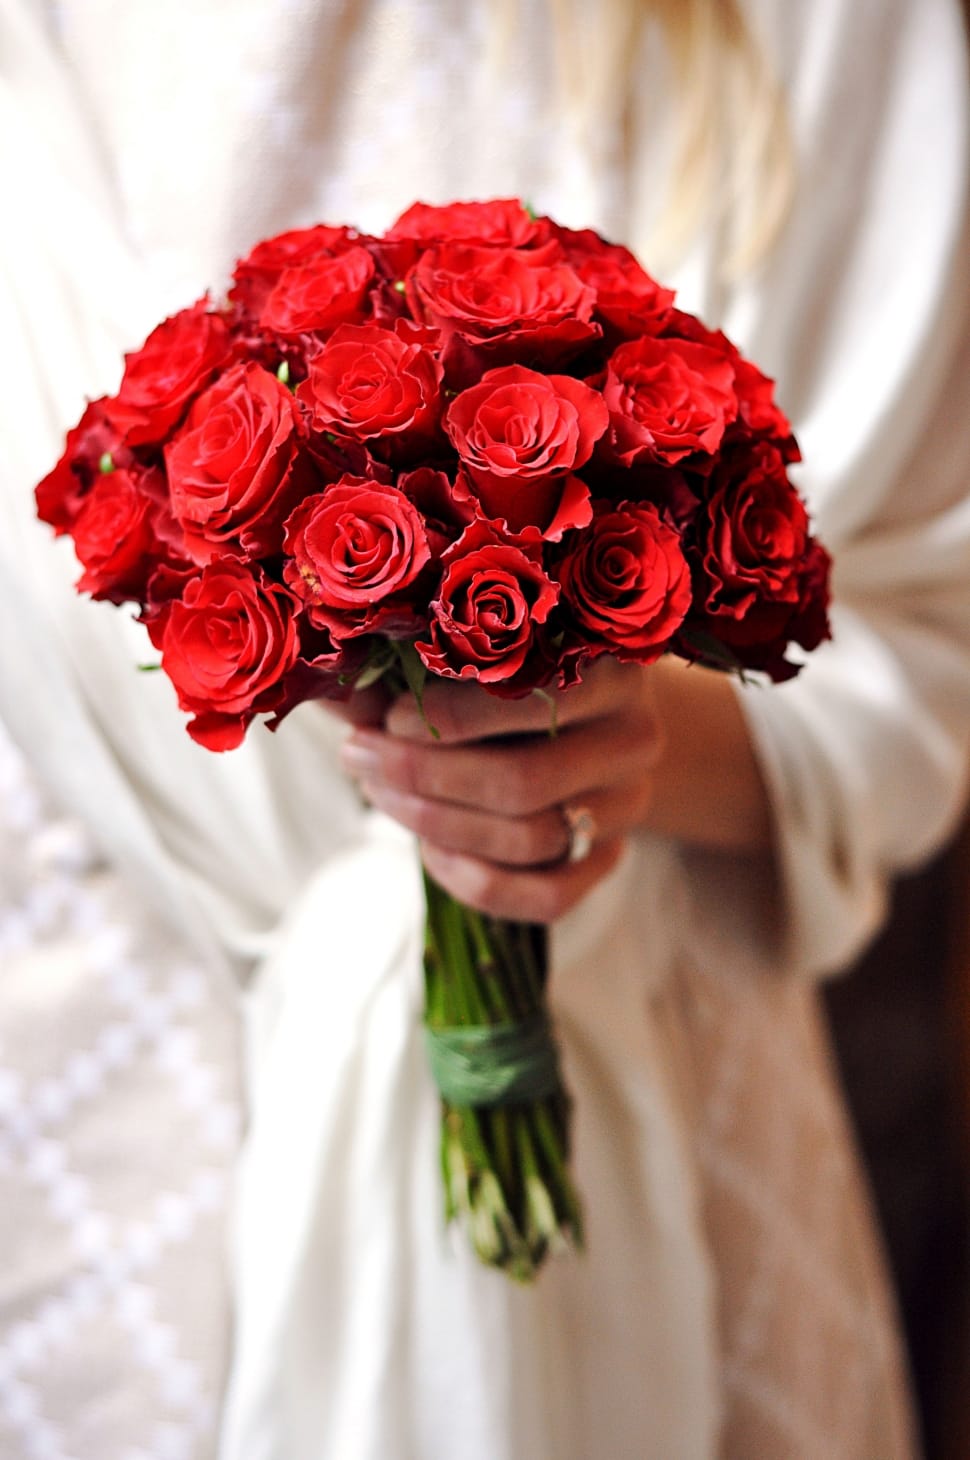 woman holding a red rose bouquet preview